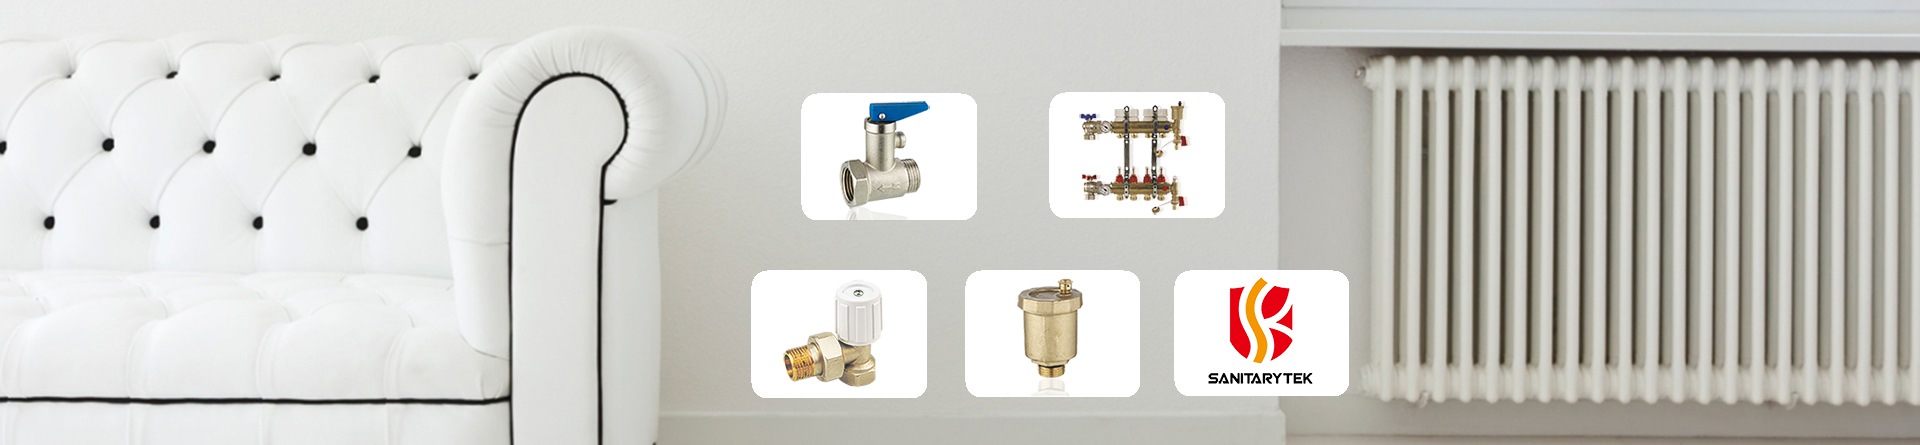 Radiator valve and heating products